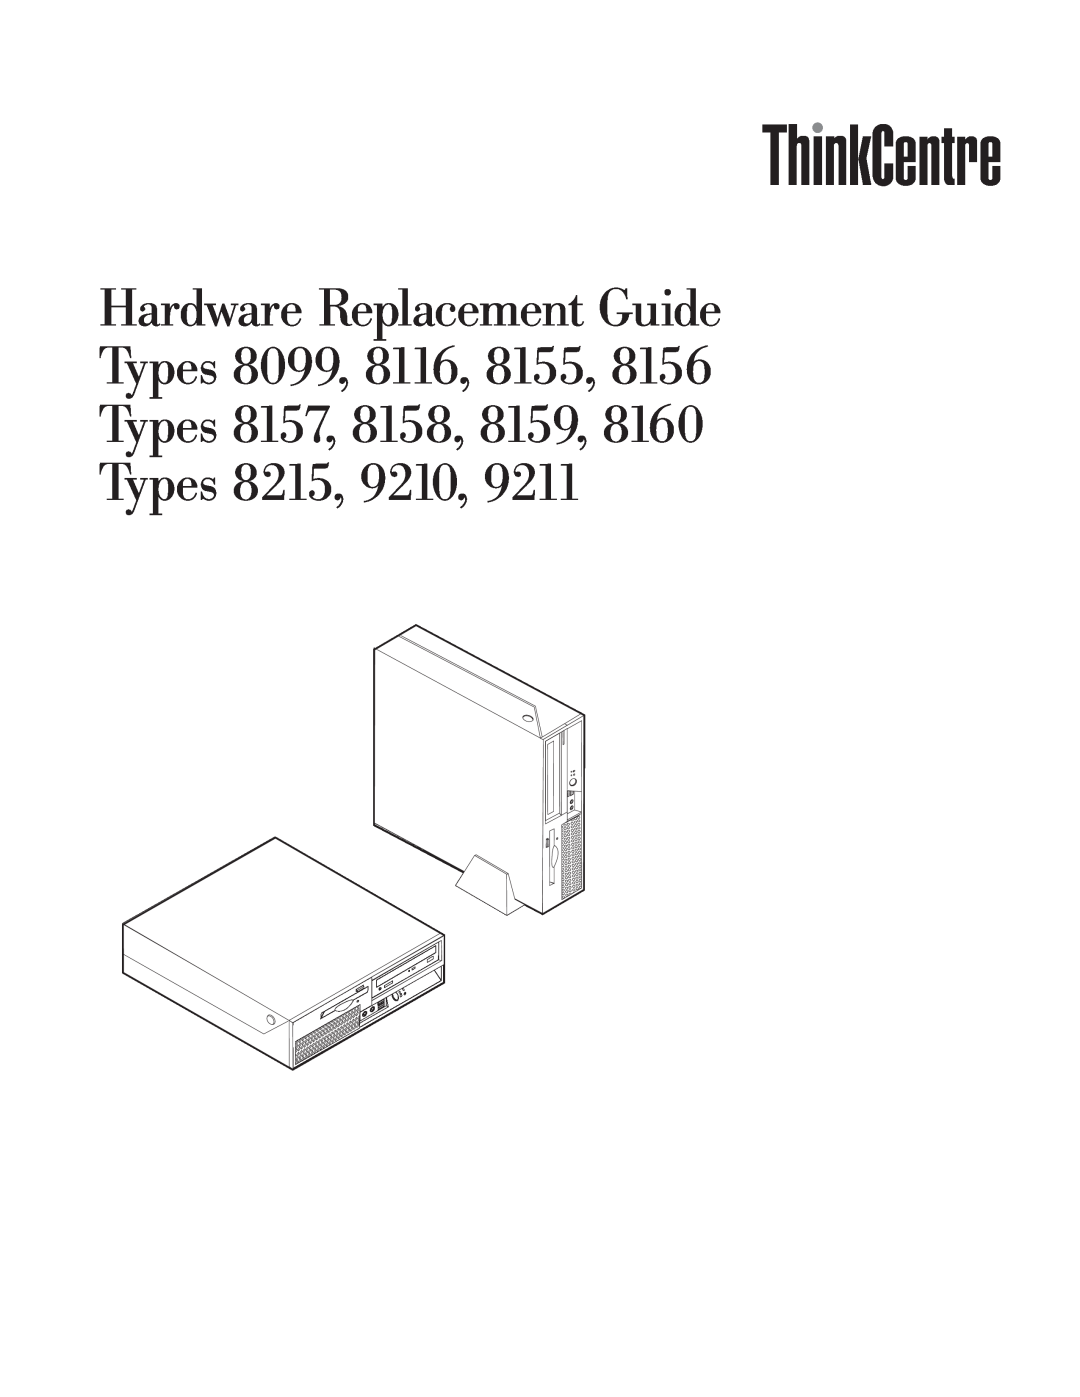 Lenovo 8160 manual Hardware Replacement Guide, Types 8099, 8116, 8155, Types 8157, 8158, 8159, Types 8215, 9210 